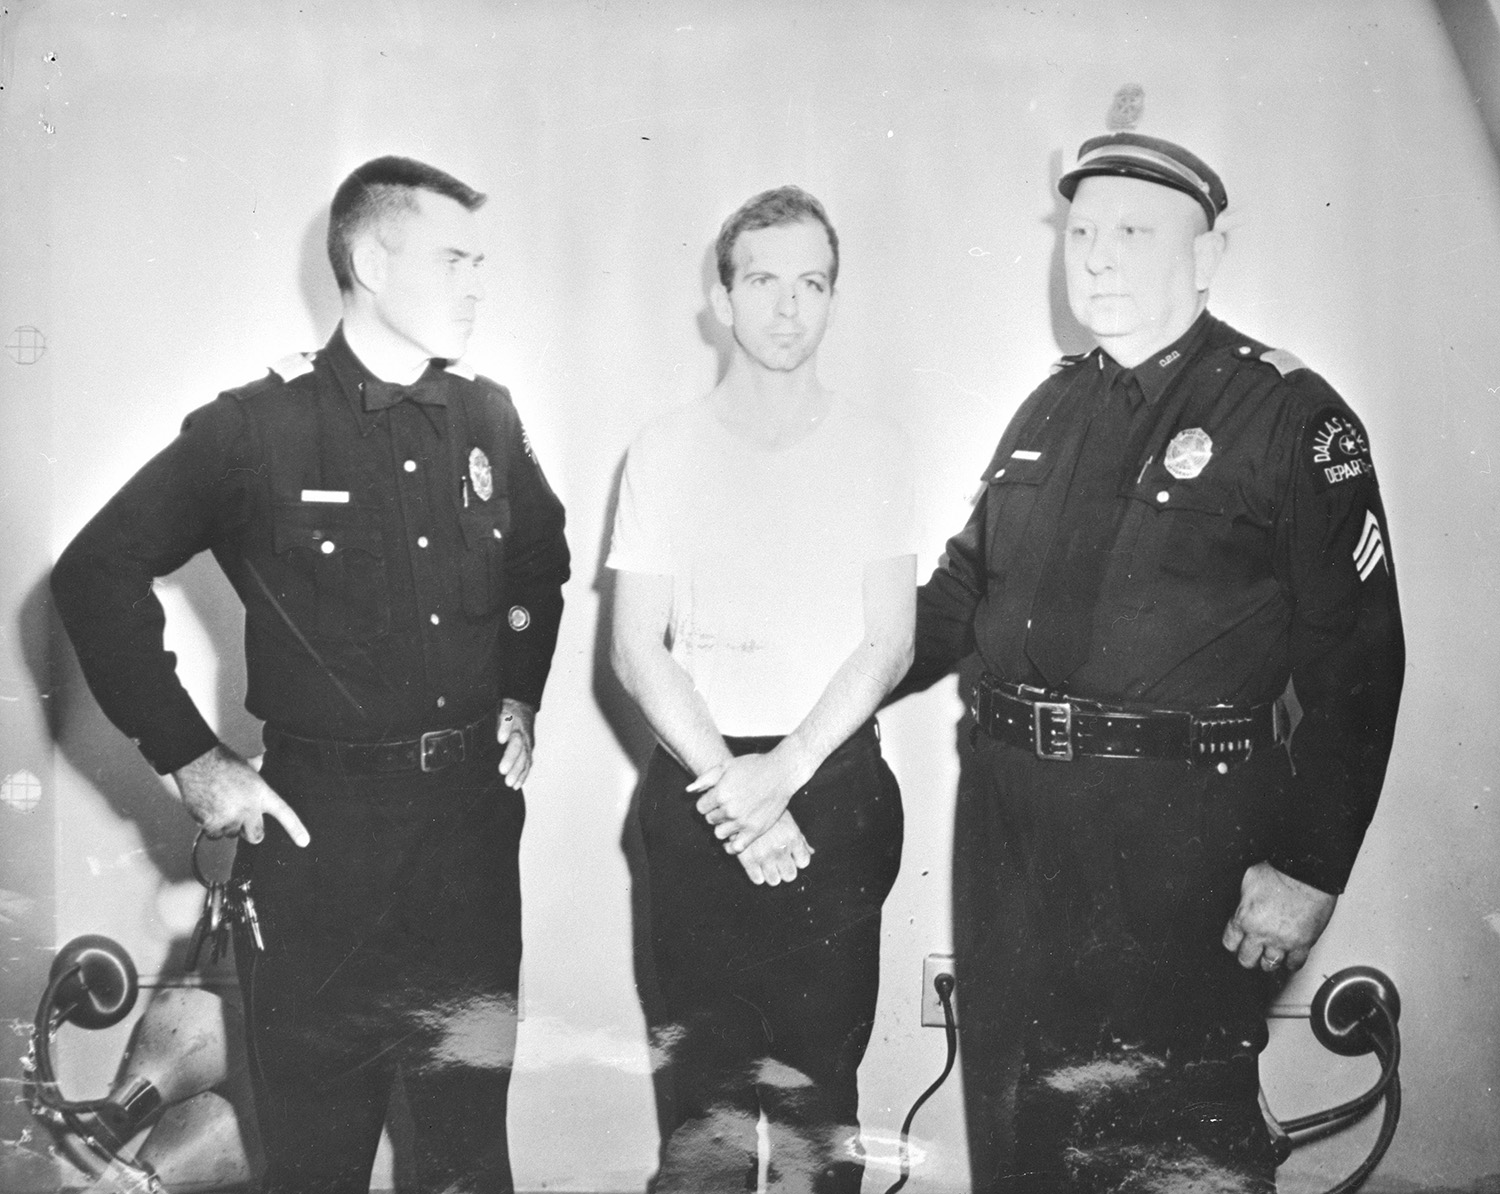 Warren Commission exhibit CE 520
Photograph of Lee Harvey Oswald and two policemen taken after Oswald's arrest
CE 520_2007_001